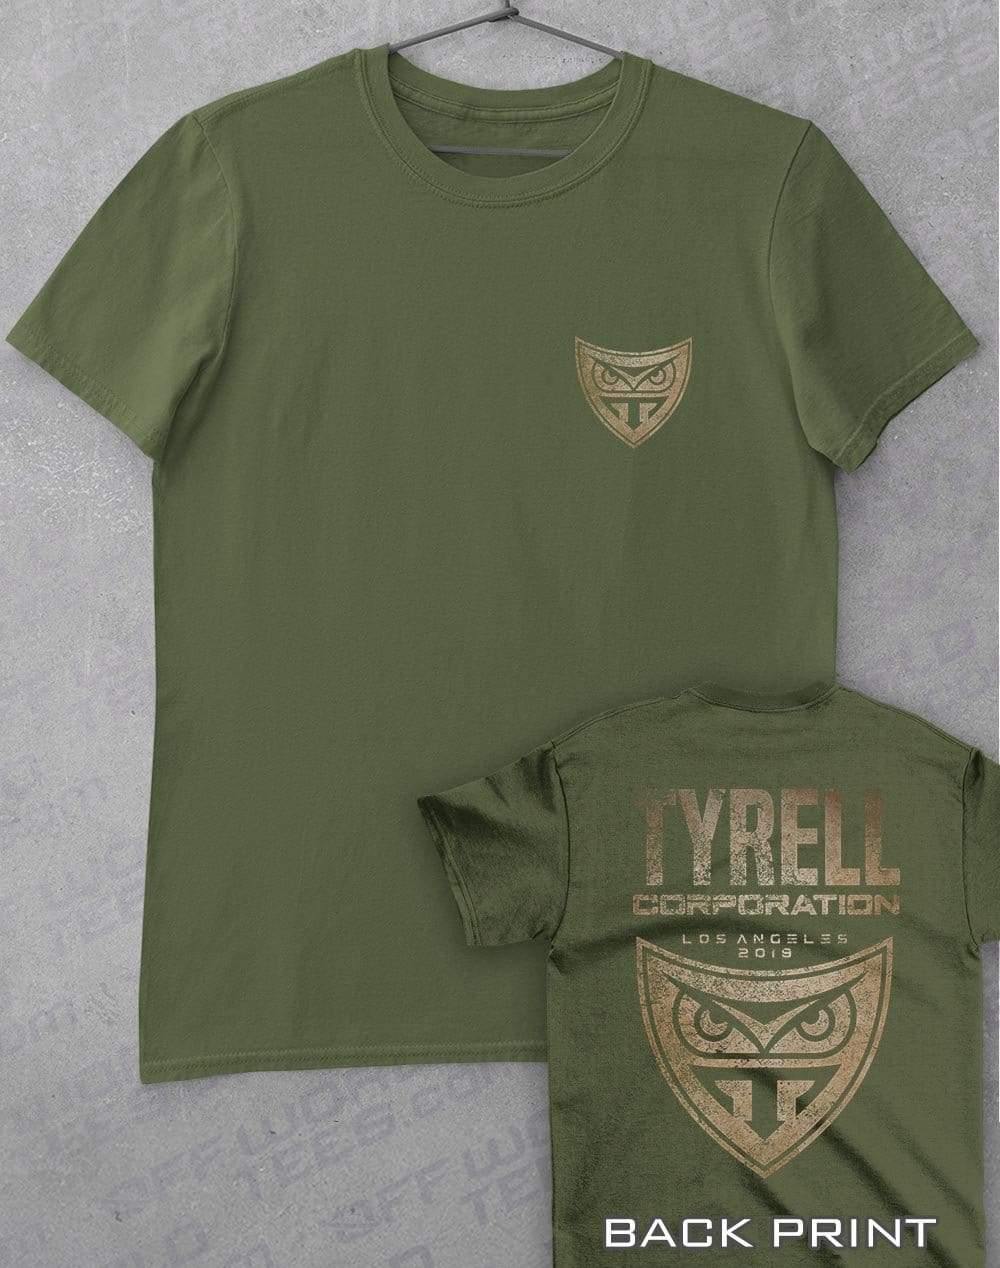 Tyrell Corporation Distressed with Back Print T-Shirt S / Military Green  - Off World Tees